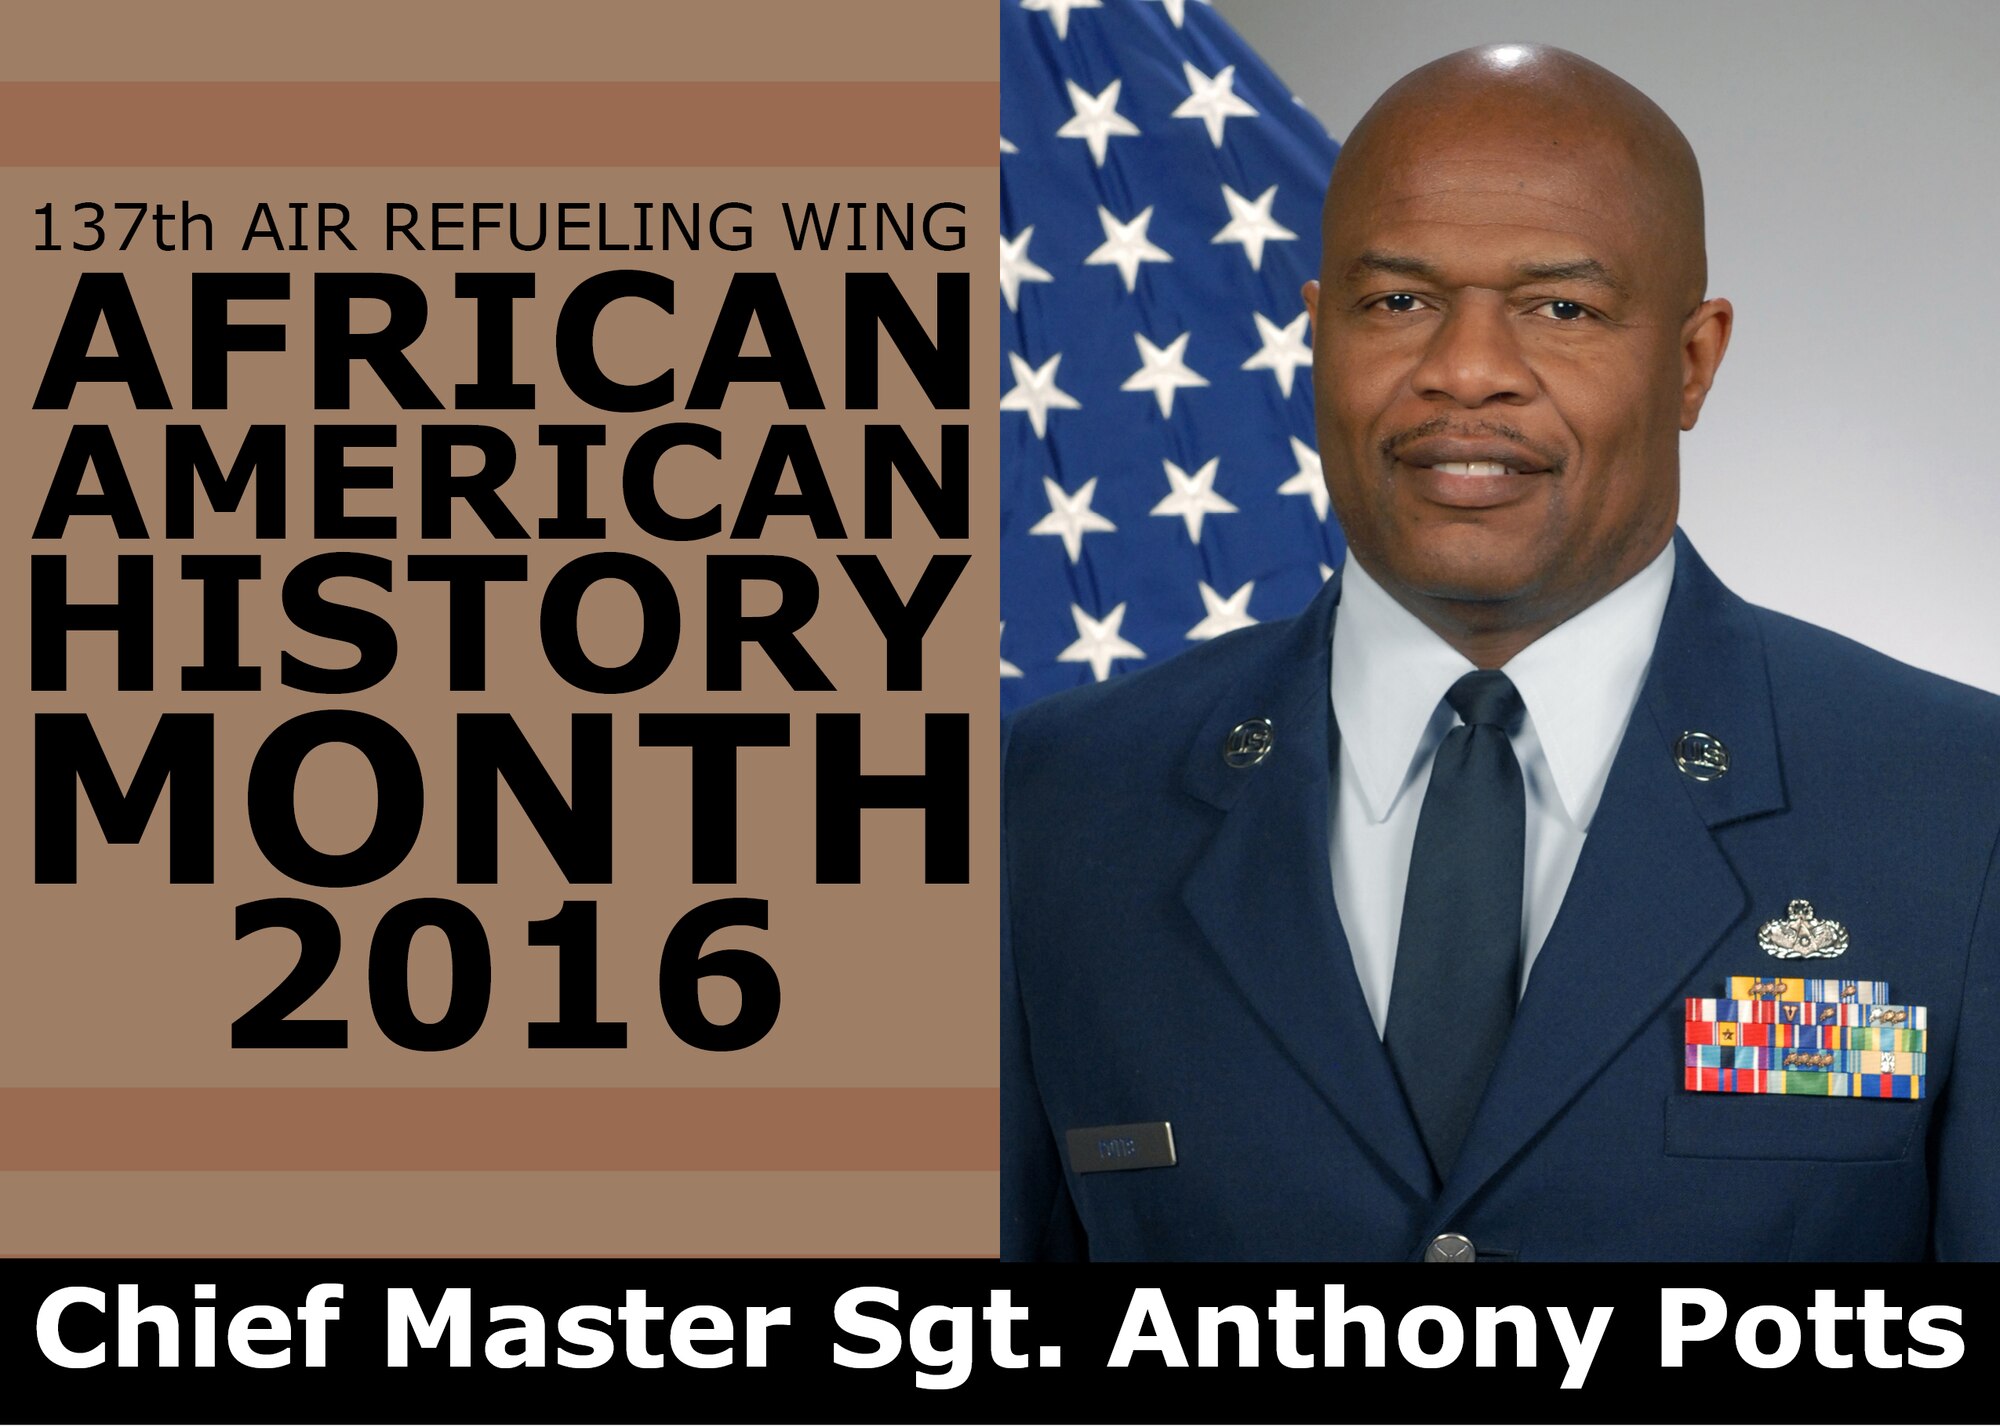 Chief Master Sgt. Anthony Potts overcame challenges in his own career to achieve his current rank and appreciates the Airmen who have come before him while continuing to mentor the Airmen who will follow him. The 137th Air Refueling Wing is highlighting the African-American Airmen who have helped to advance the U.S. Air Force, the Air National Guard and the 137th Air Refueling Wing in a four-part series as part of African American History Month. (U.S. Air National Guard illustration by Master Sgt. Andrew LaMoreaux)